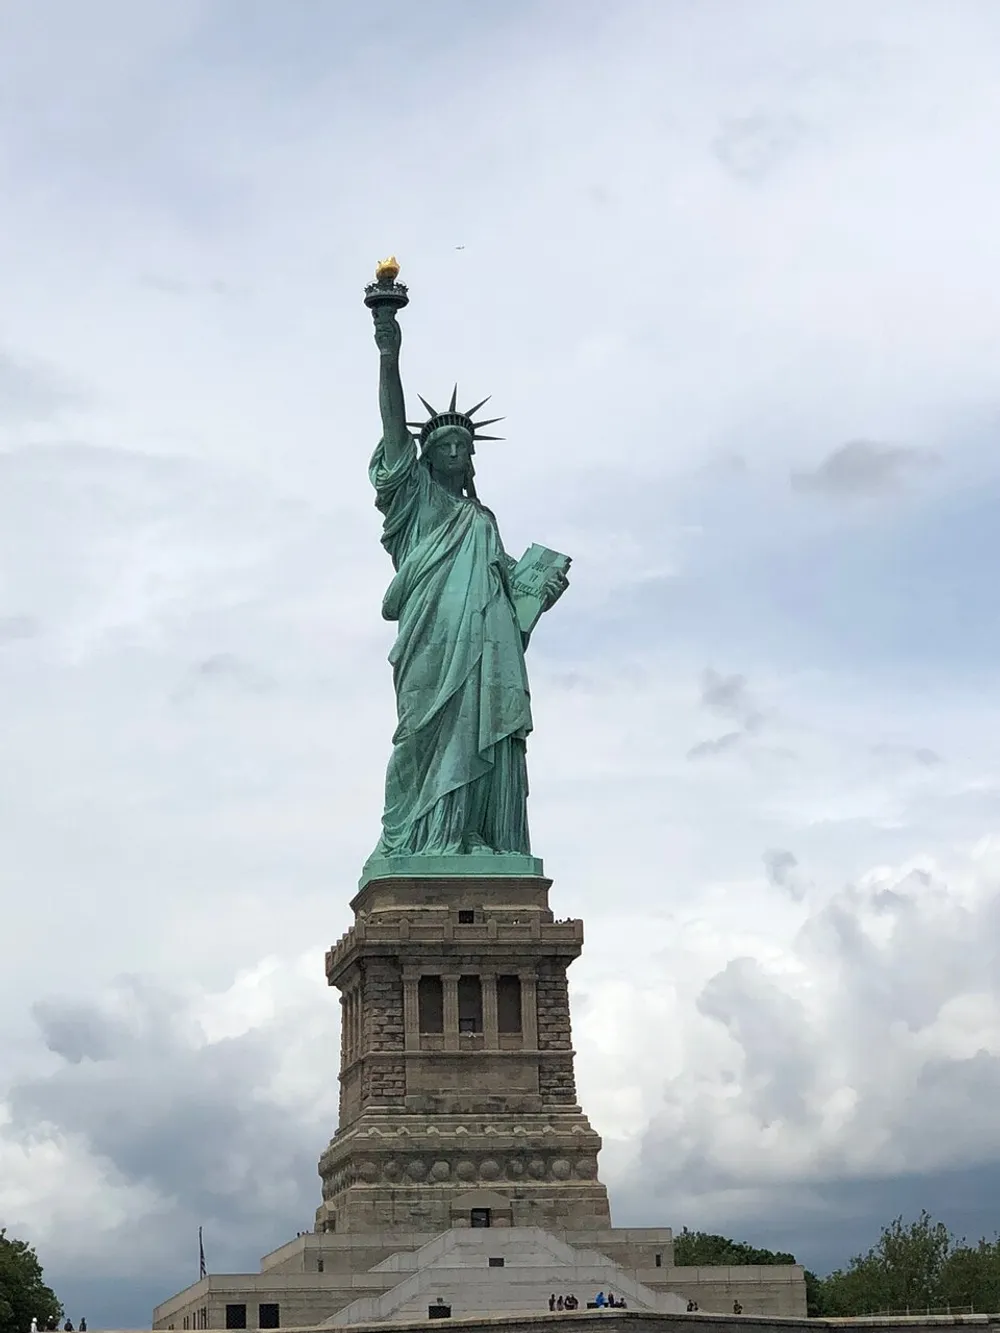 The image shows a close-up view of the Statue of Liberty against a cloudy sky background